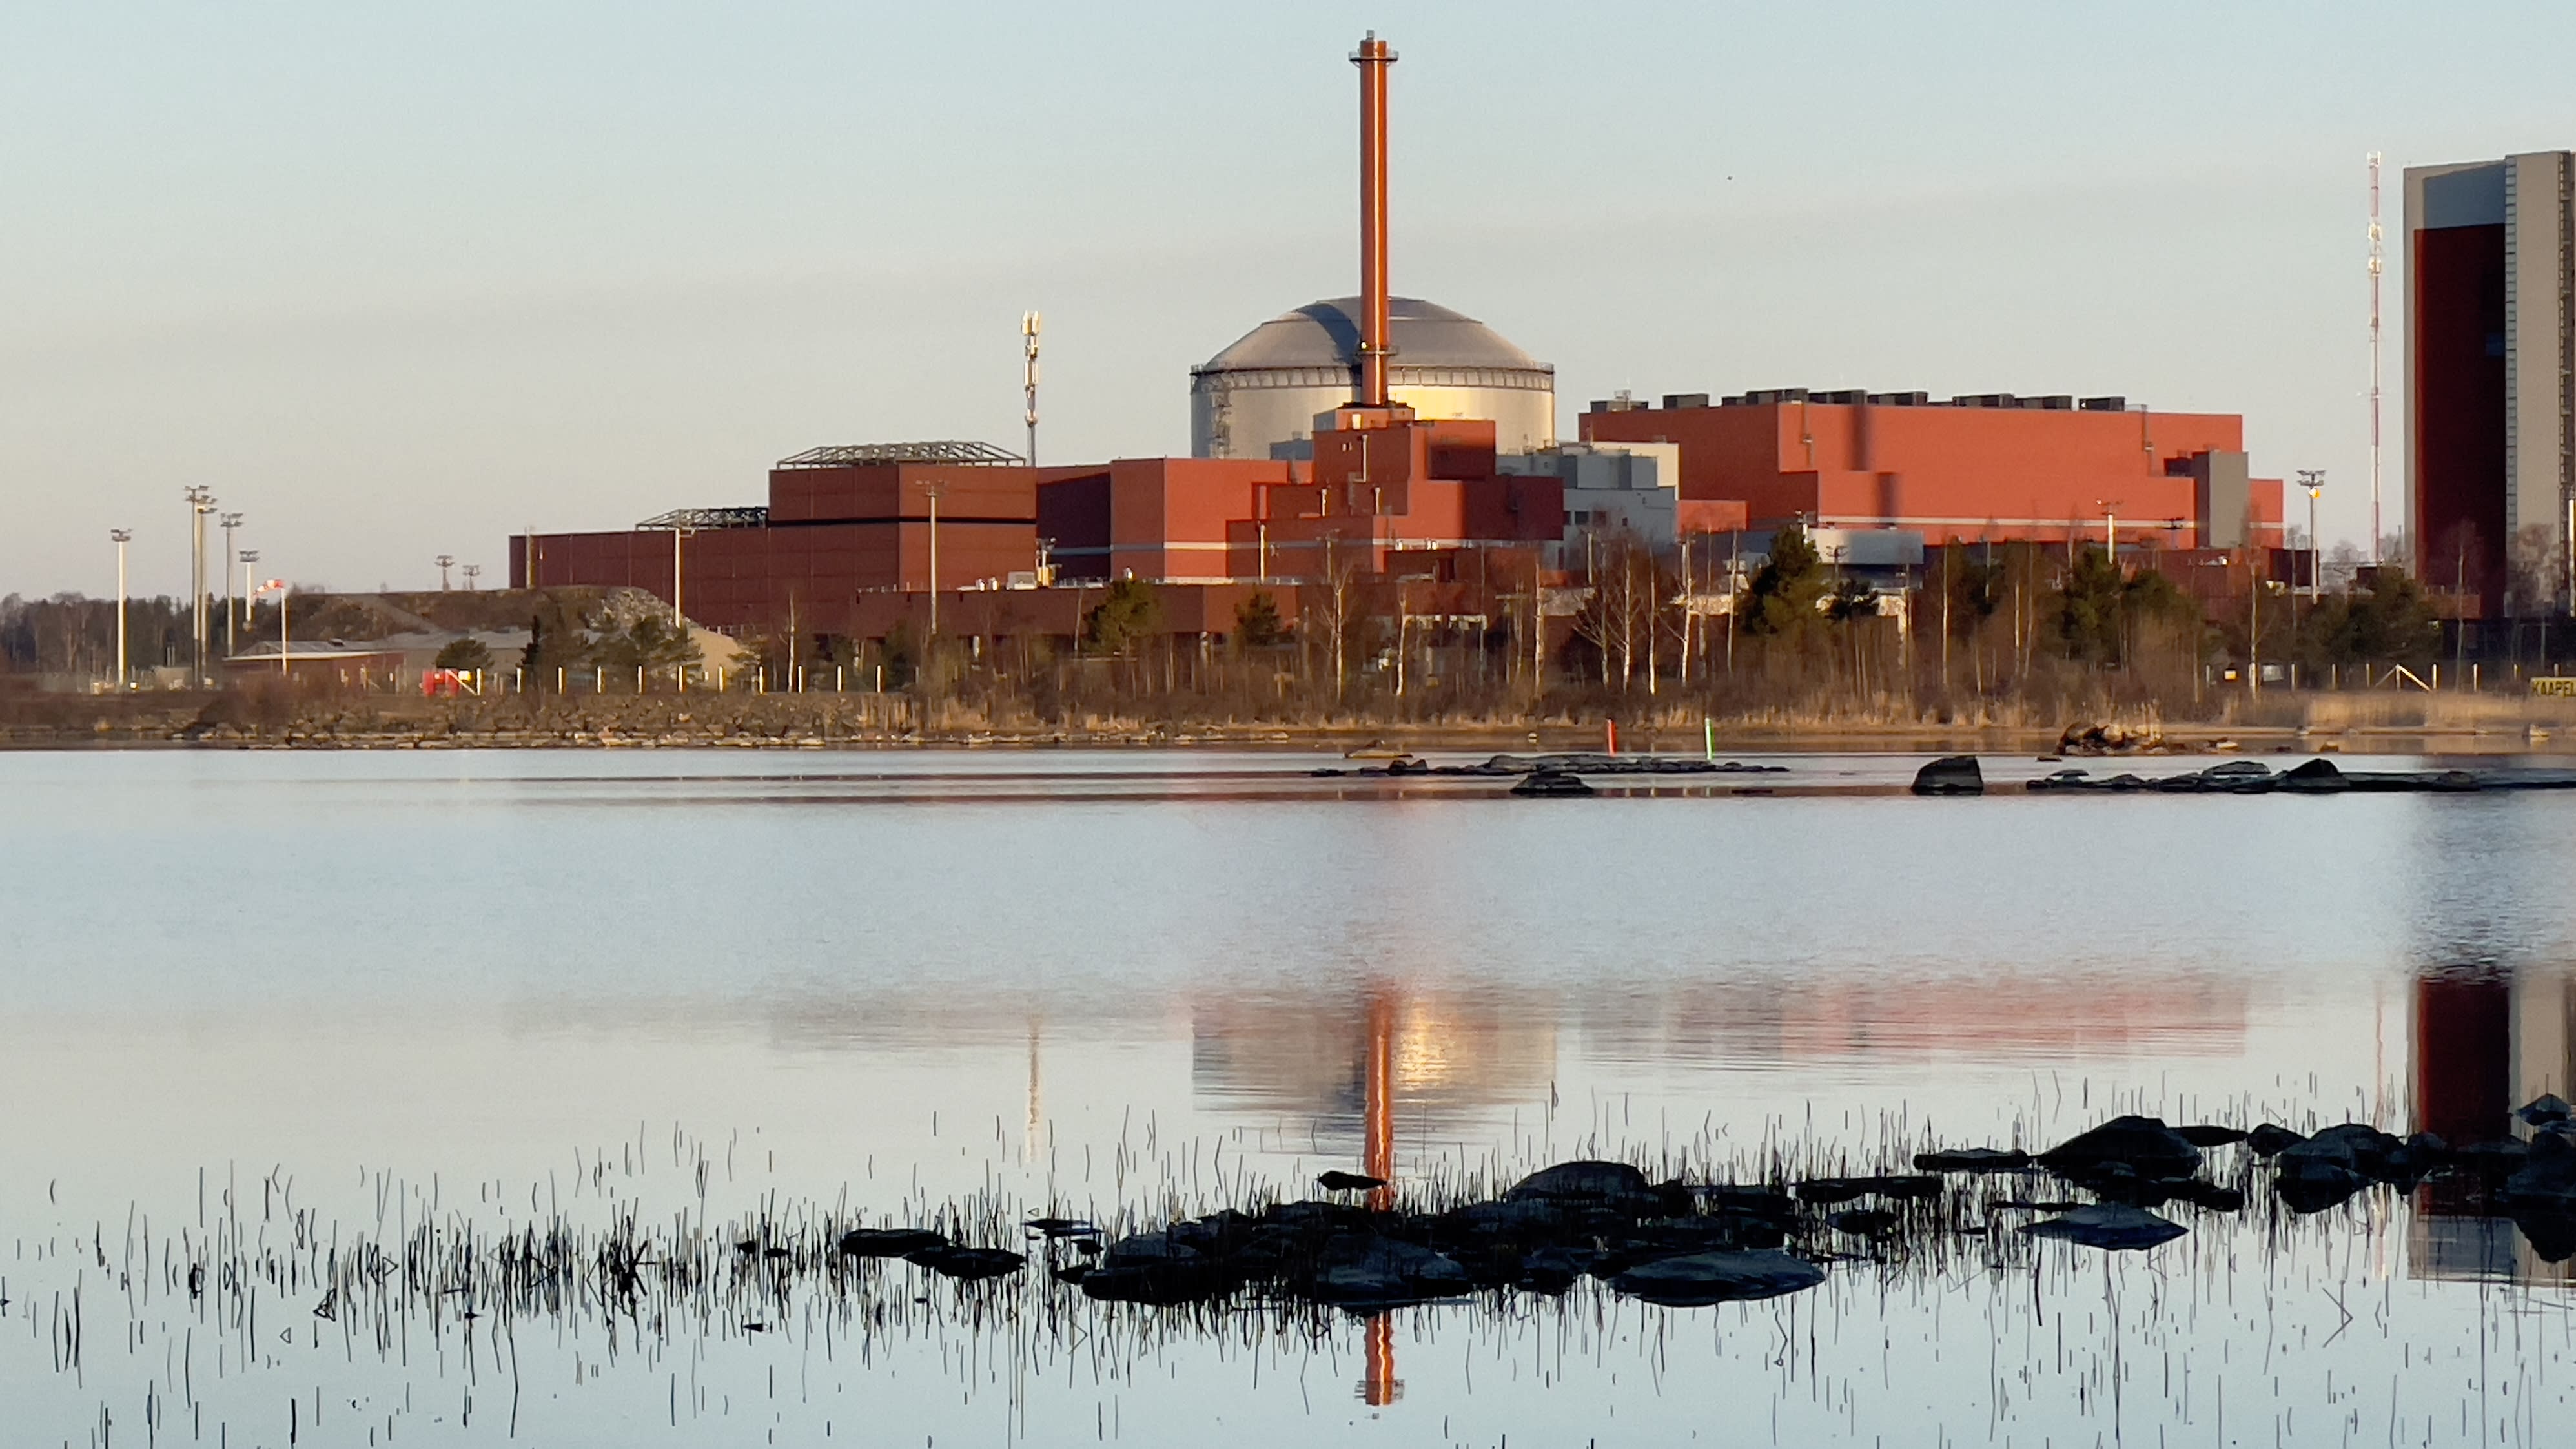 Finland’s newest nuclear power plant heats the sea and damages nature